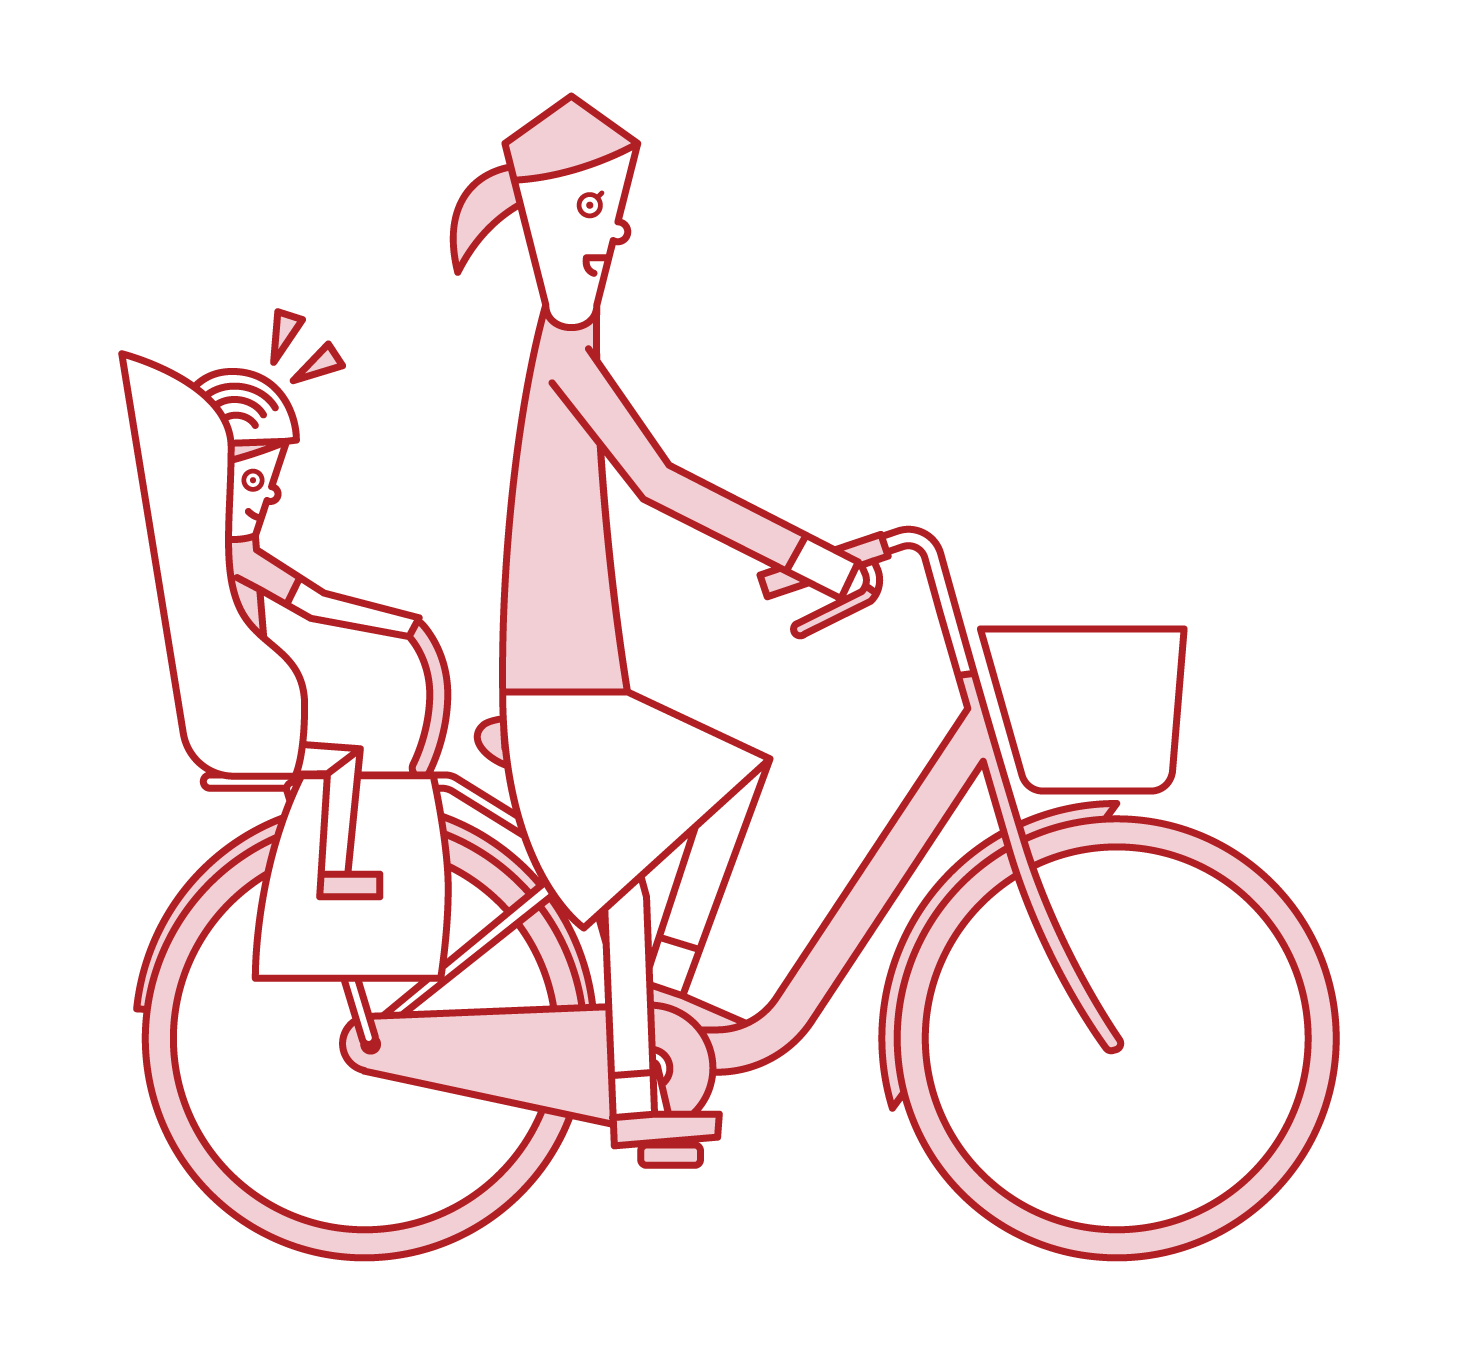 Illustration of a woman riding a bicycle with a child in a child seat